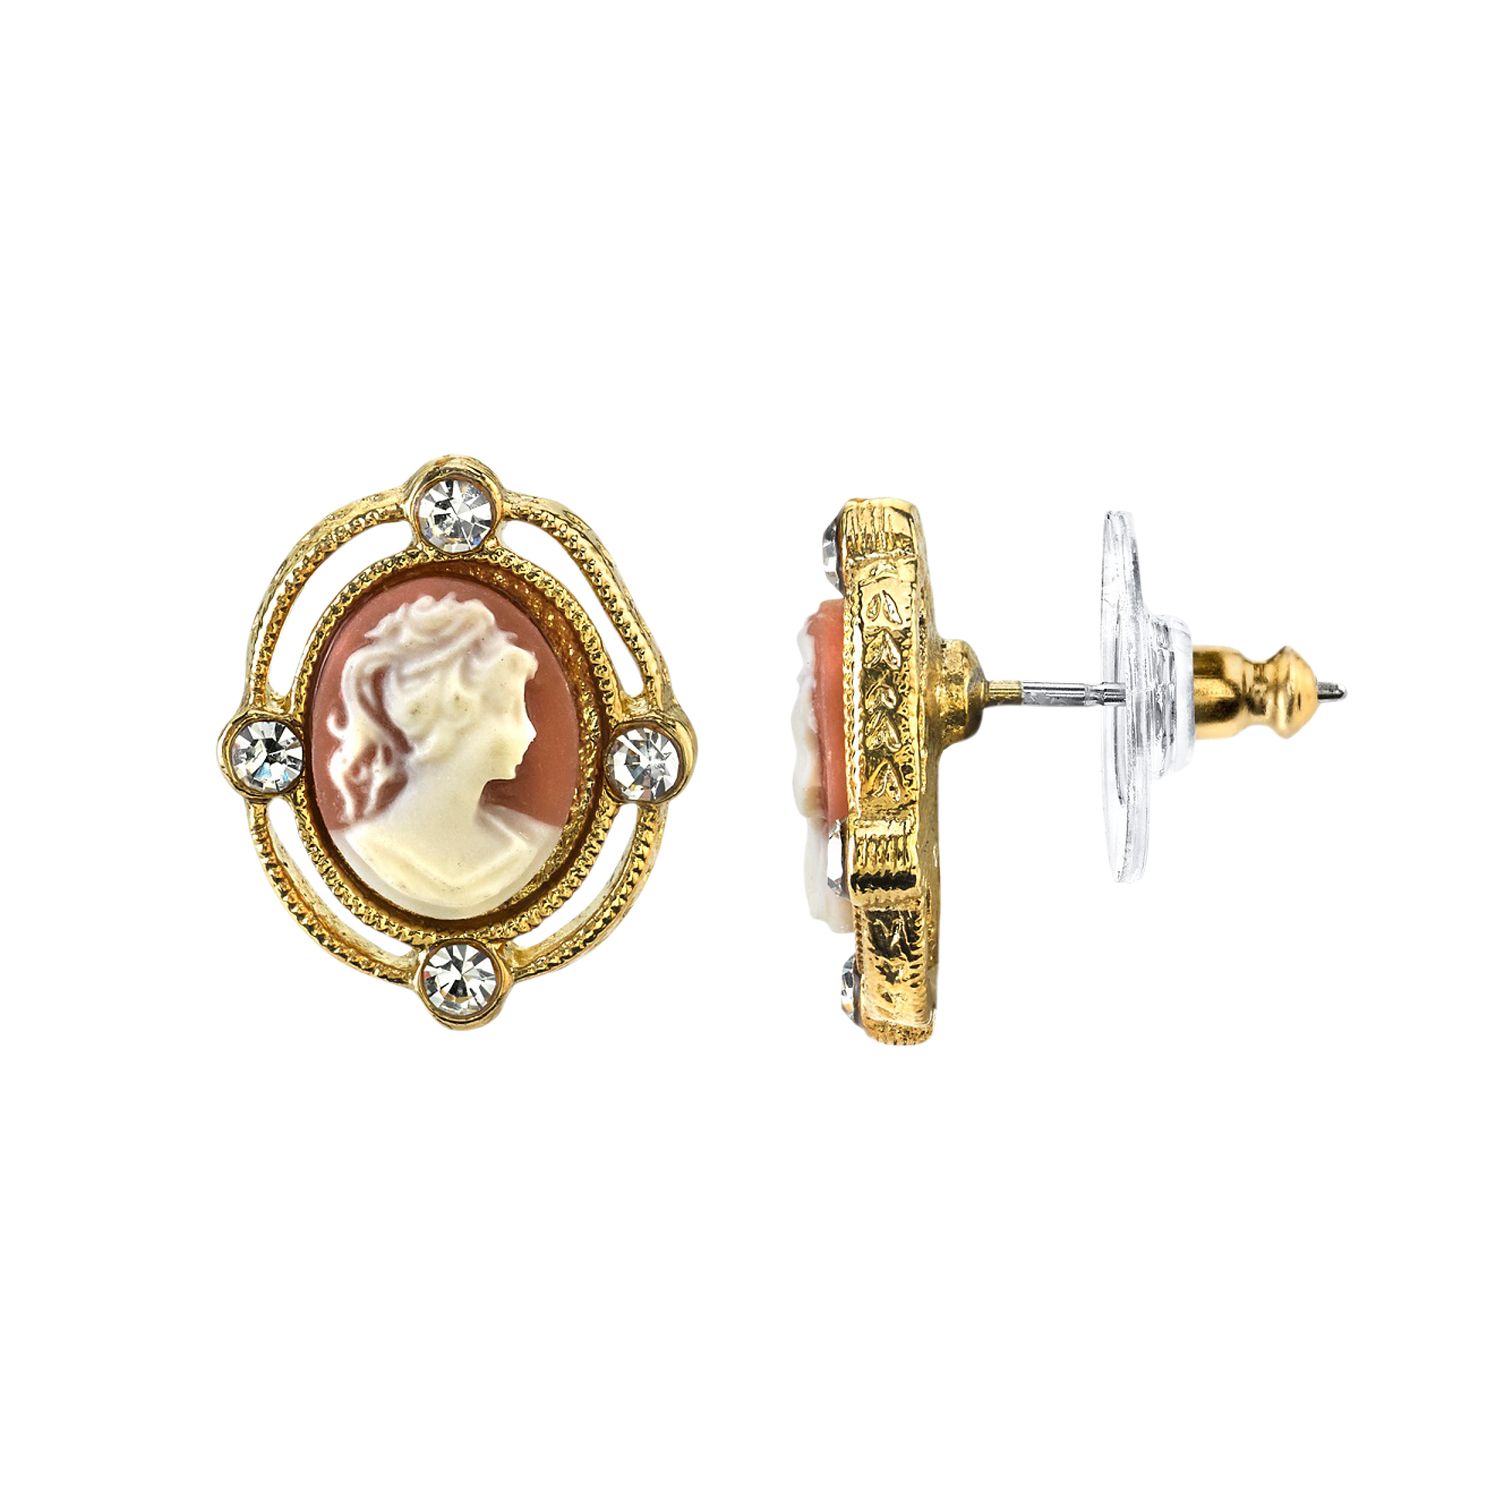 Image for Downton Abbey Cameo Stud Earrings at Kohl's.